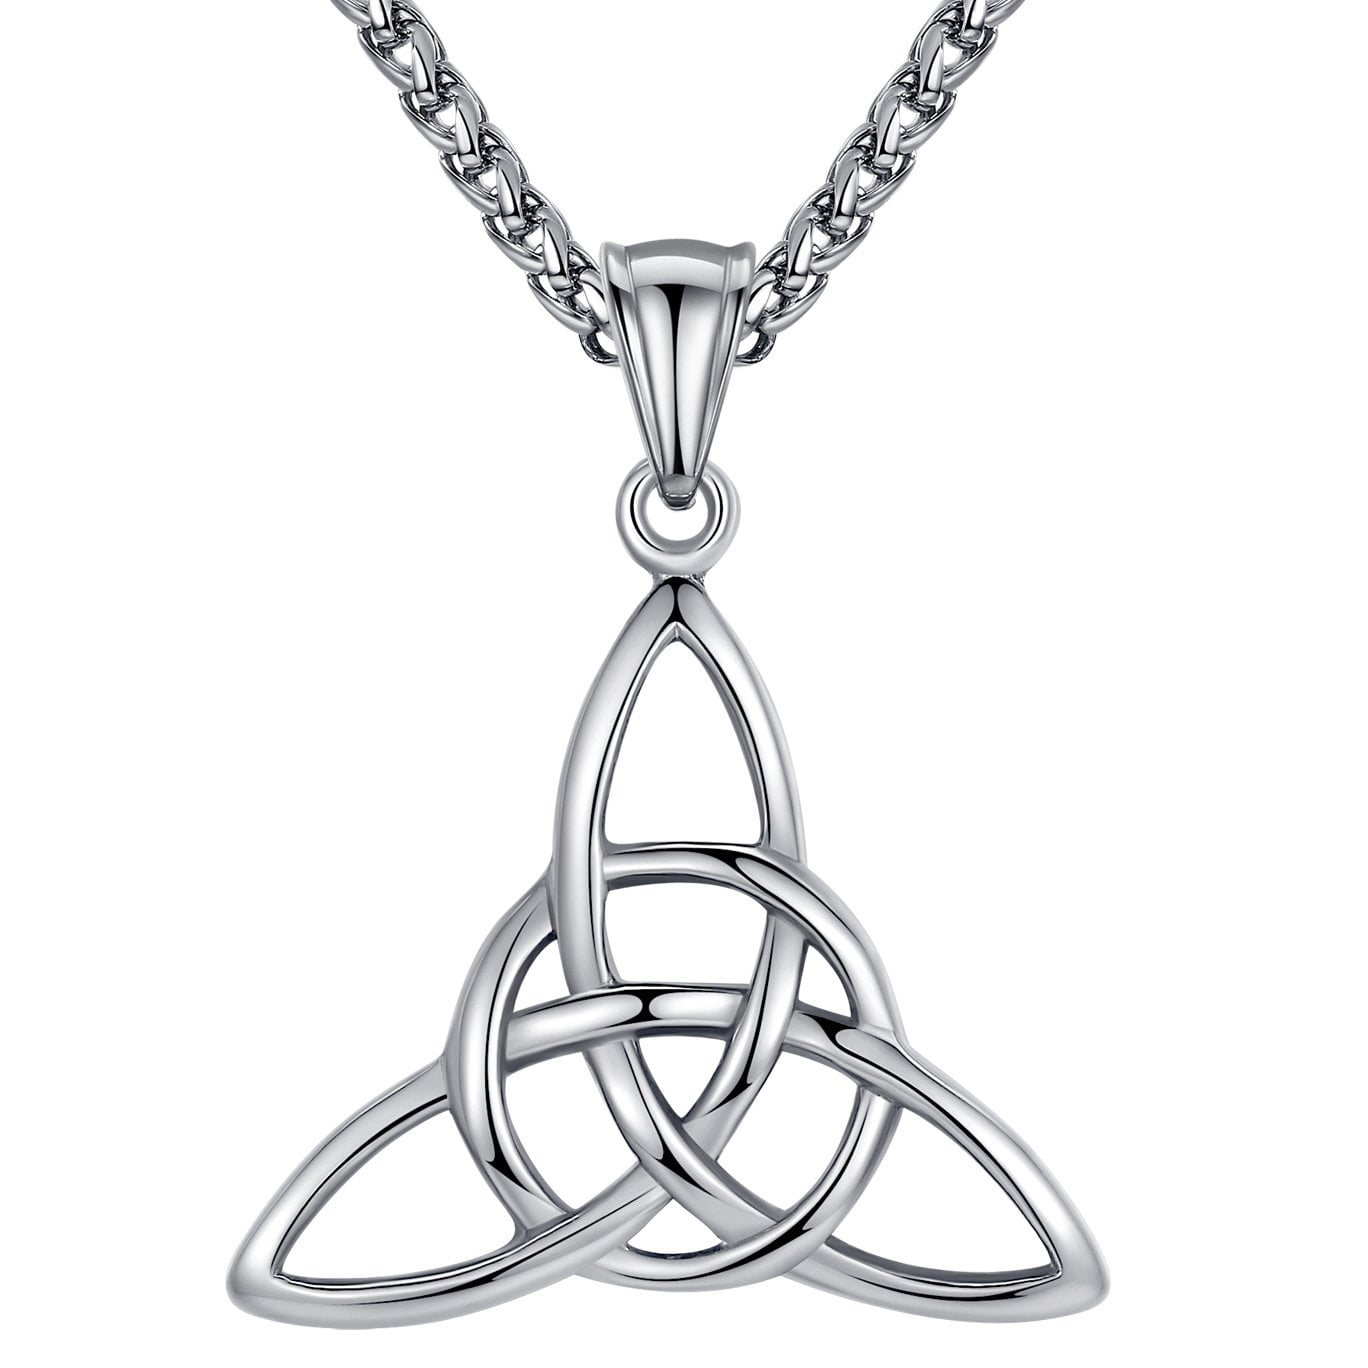 Celtic Knot Triquetra Both Sided Necklace Pendant Men's Stainless Steel Charm